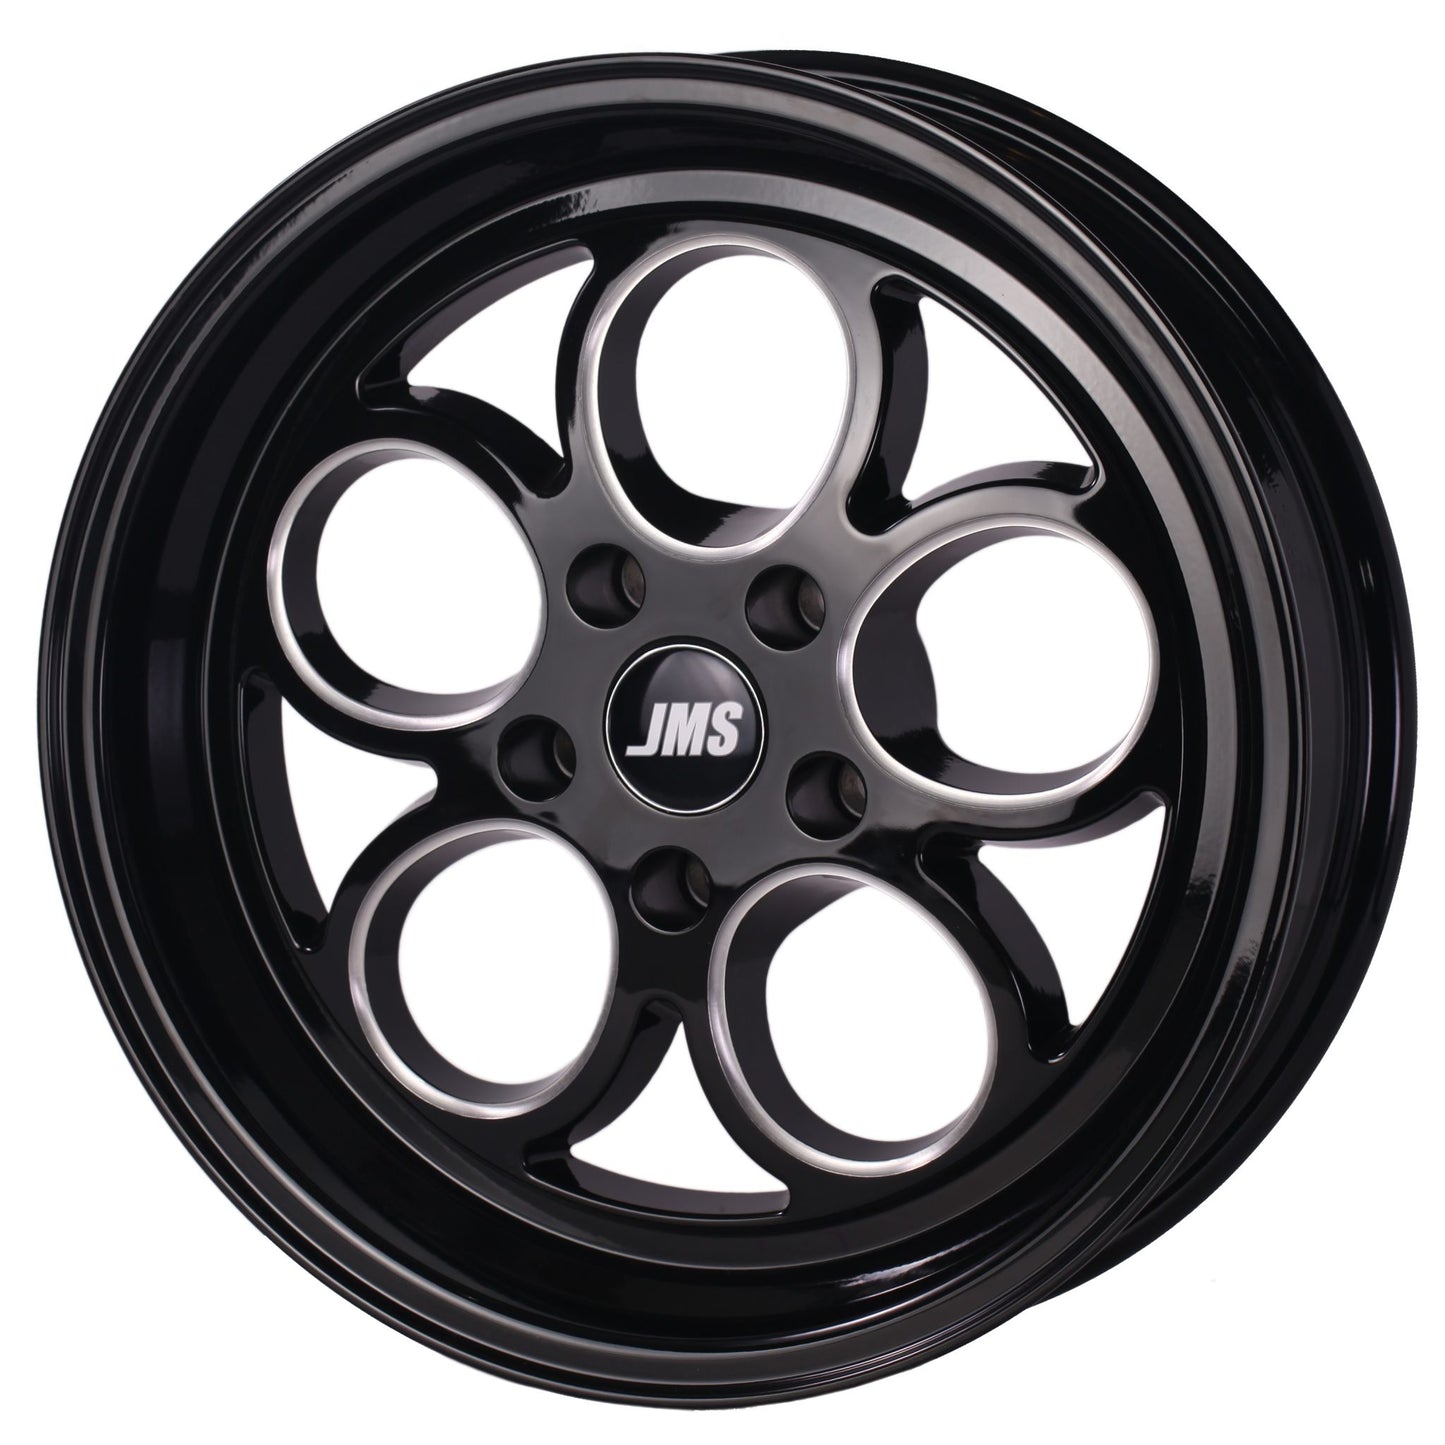 JMS Savage Series Race Wheels - Black Clear w/ Diamond Cut; 17 inch X 4.5 inch Front Wheel w/ Lug Nuts -- Fits 1994-2021 Mustang GT V6 2.3L and 2007-2012 Shelby GT500 S1745175FB